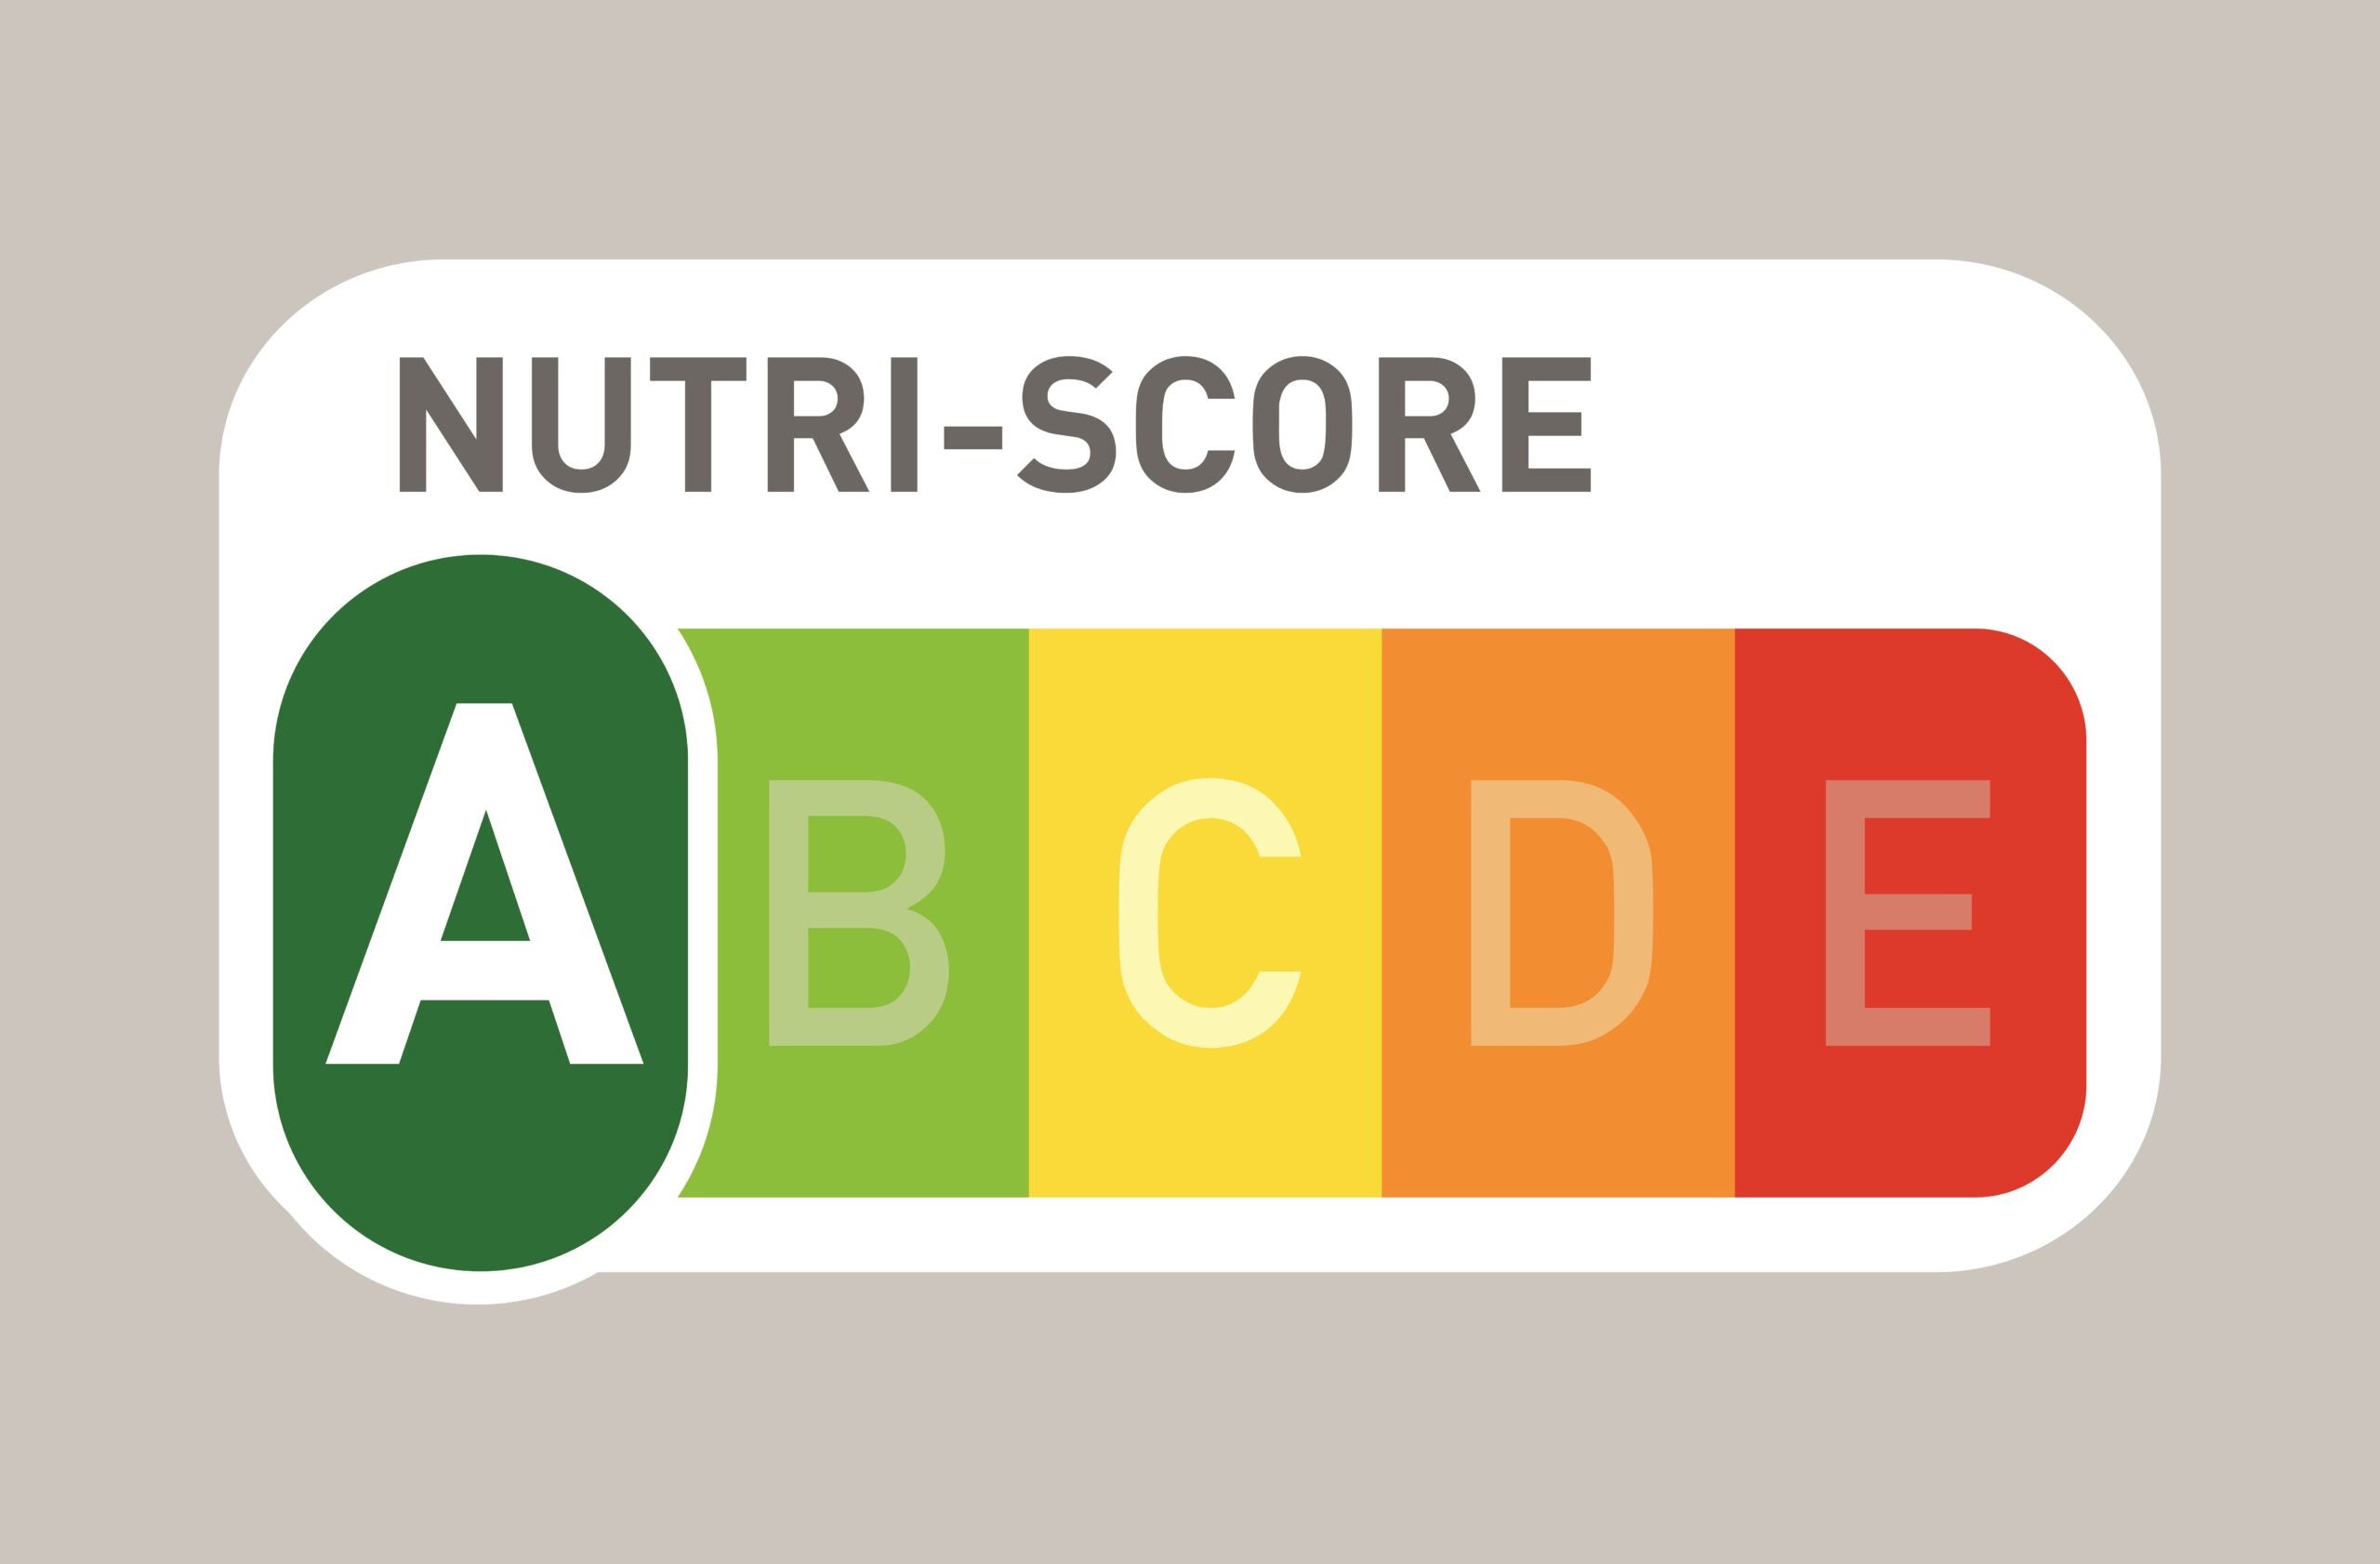 Italy passes unfavourable judgement on Nutri-Score labelling system